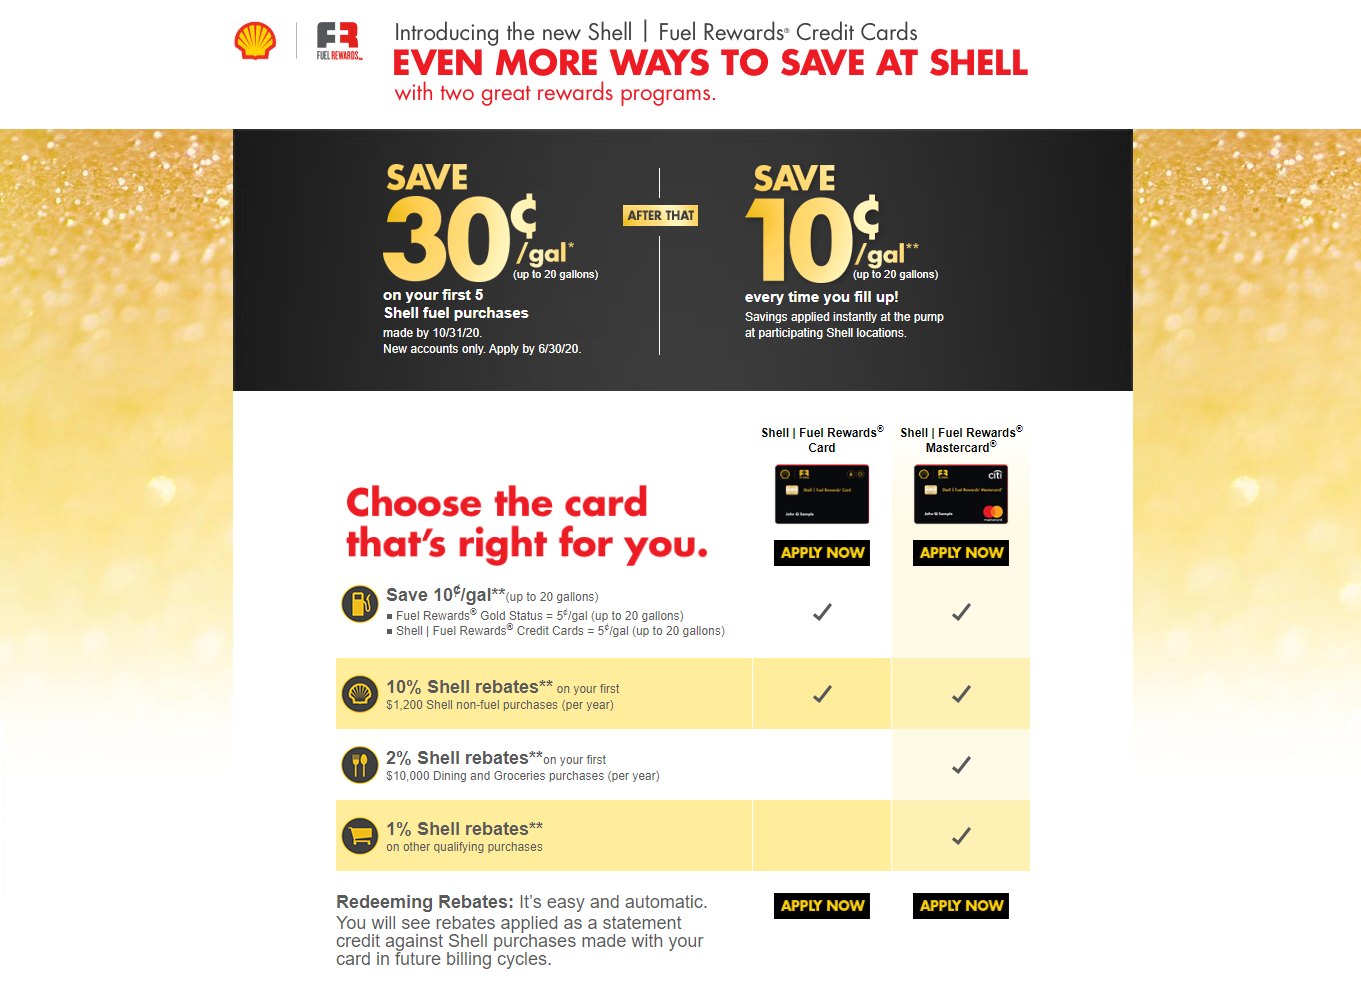 Apply for the Shell I Fuel Rewards Credit Card